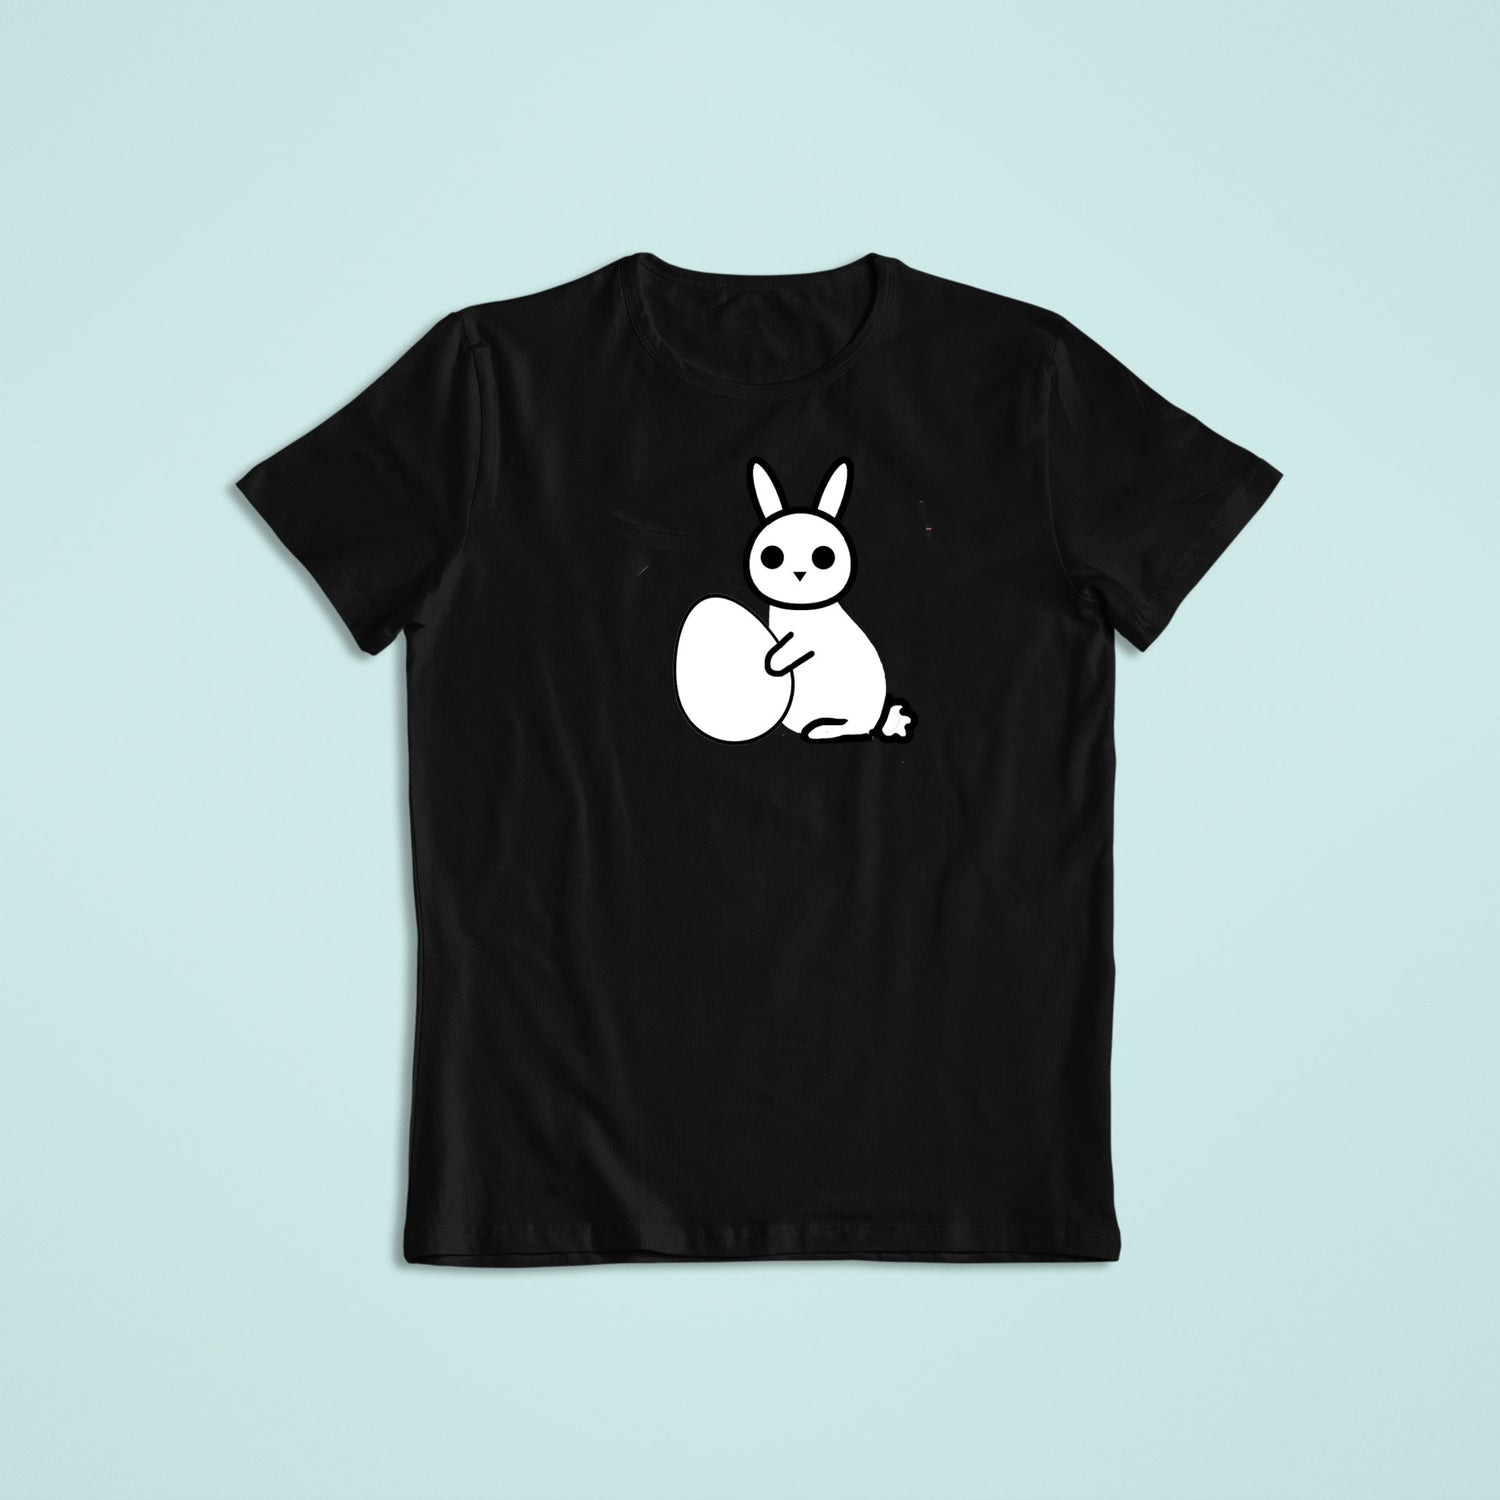 Easter bunny t-shirt